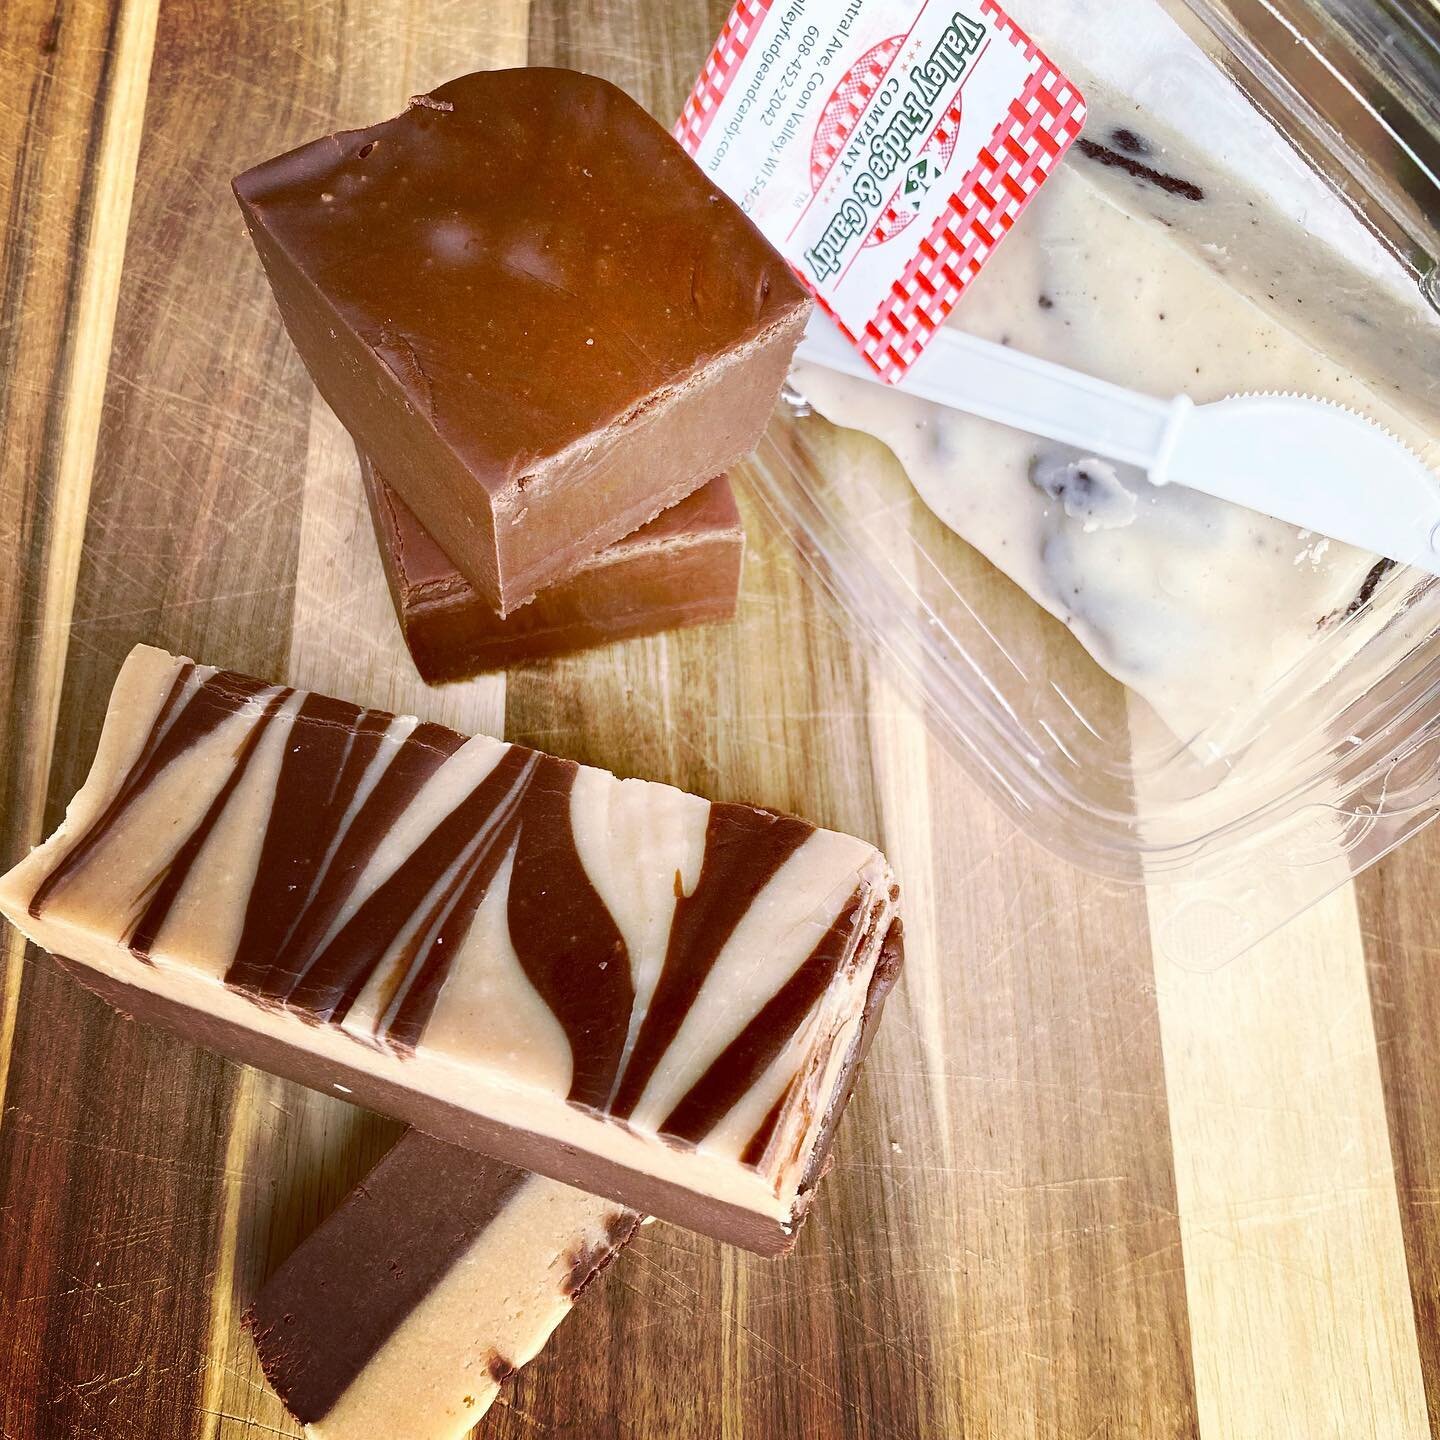 OH, FUDGE! You can now get your fudge fix at The Store! (and it comes with a little knife so you can start to eat it right away 😁). 
_
We have Chocolate, Peanut Butter Chocolate, Cookies and Cream, Chocolate Vanilla Swirl, Bourbon Maple Pecan, Choco